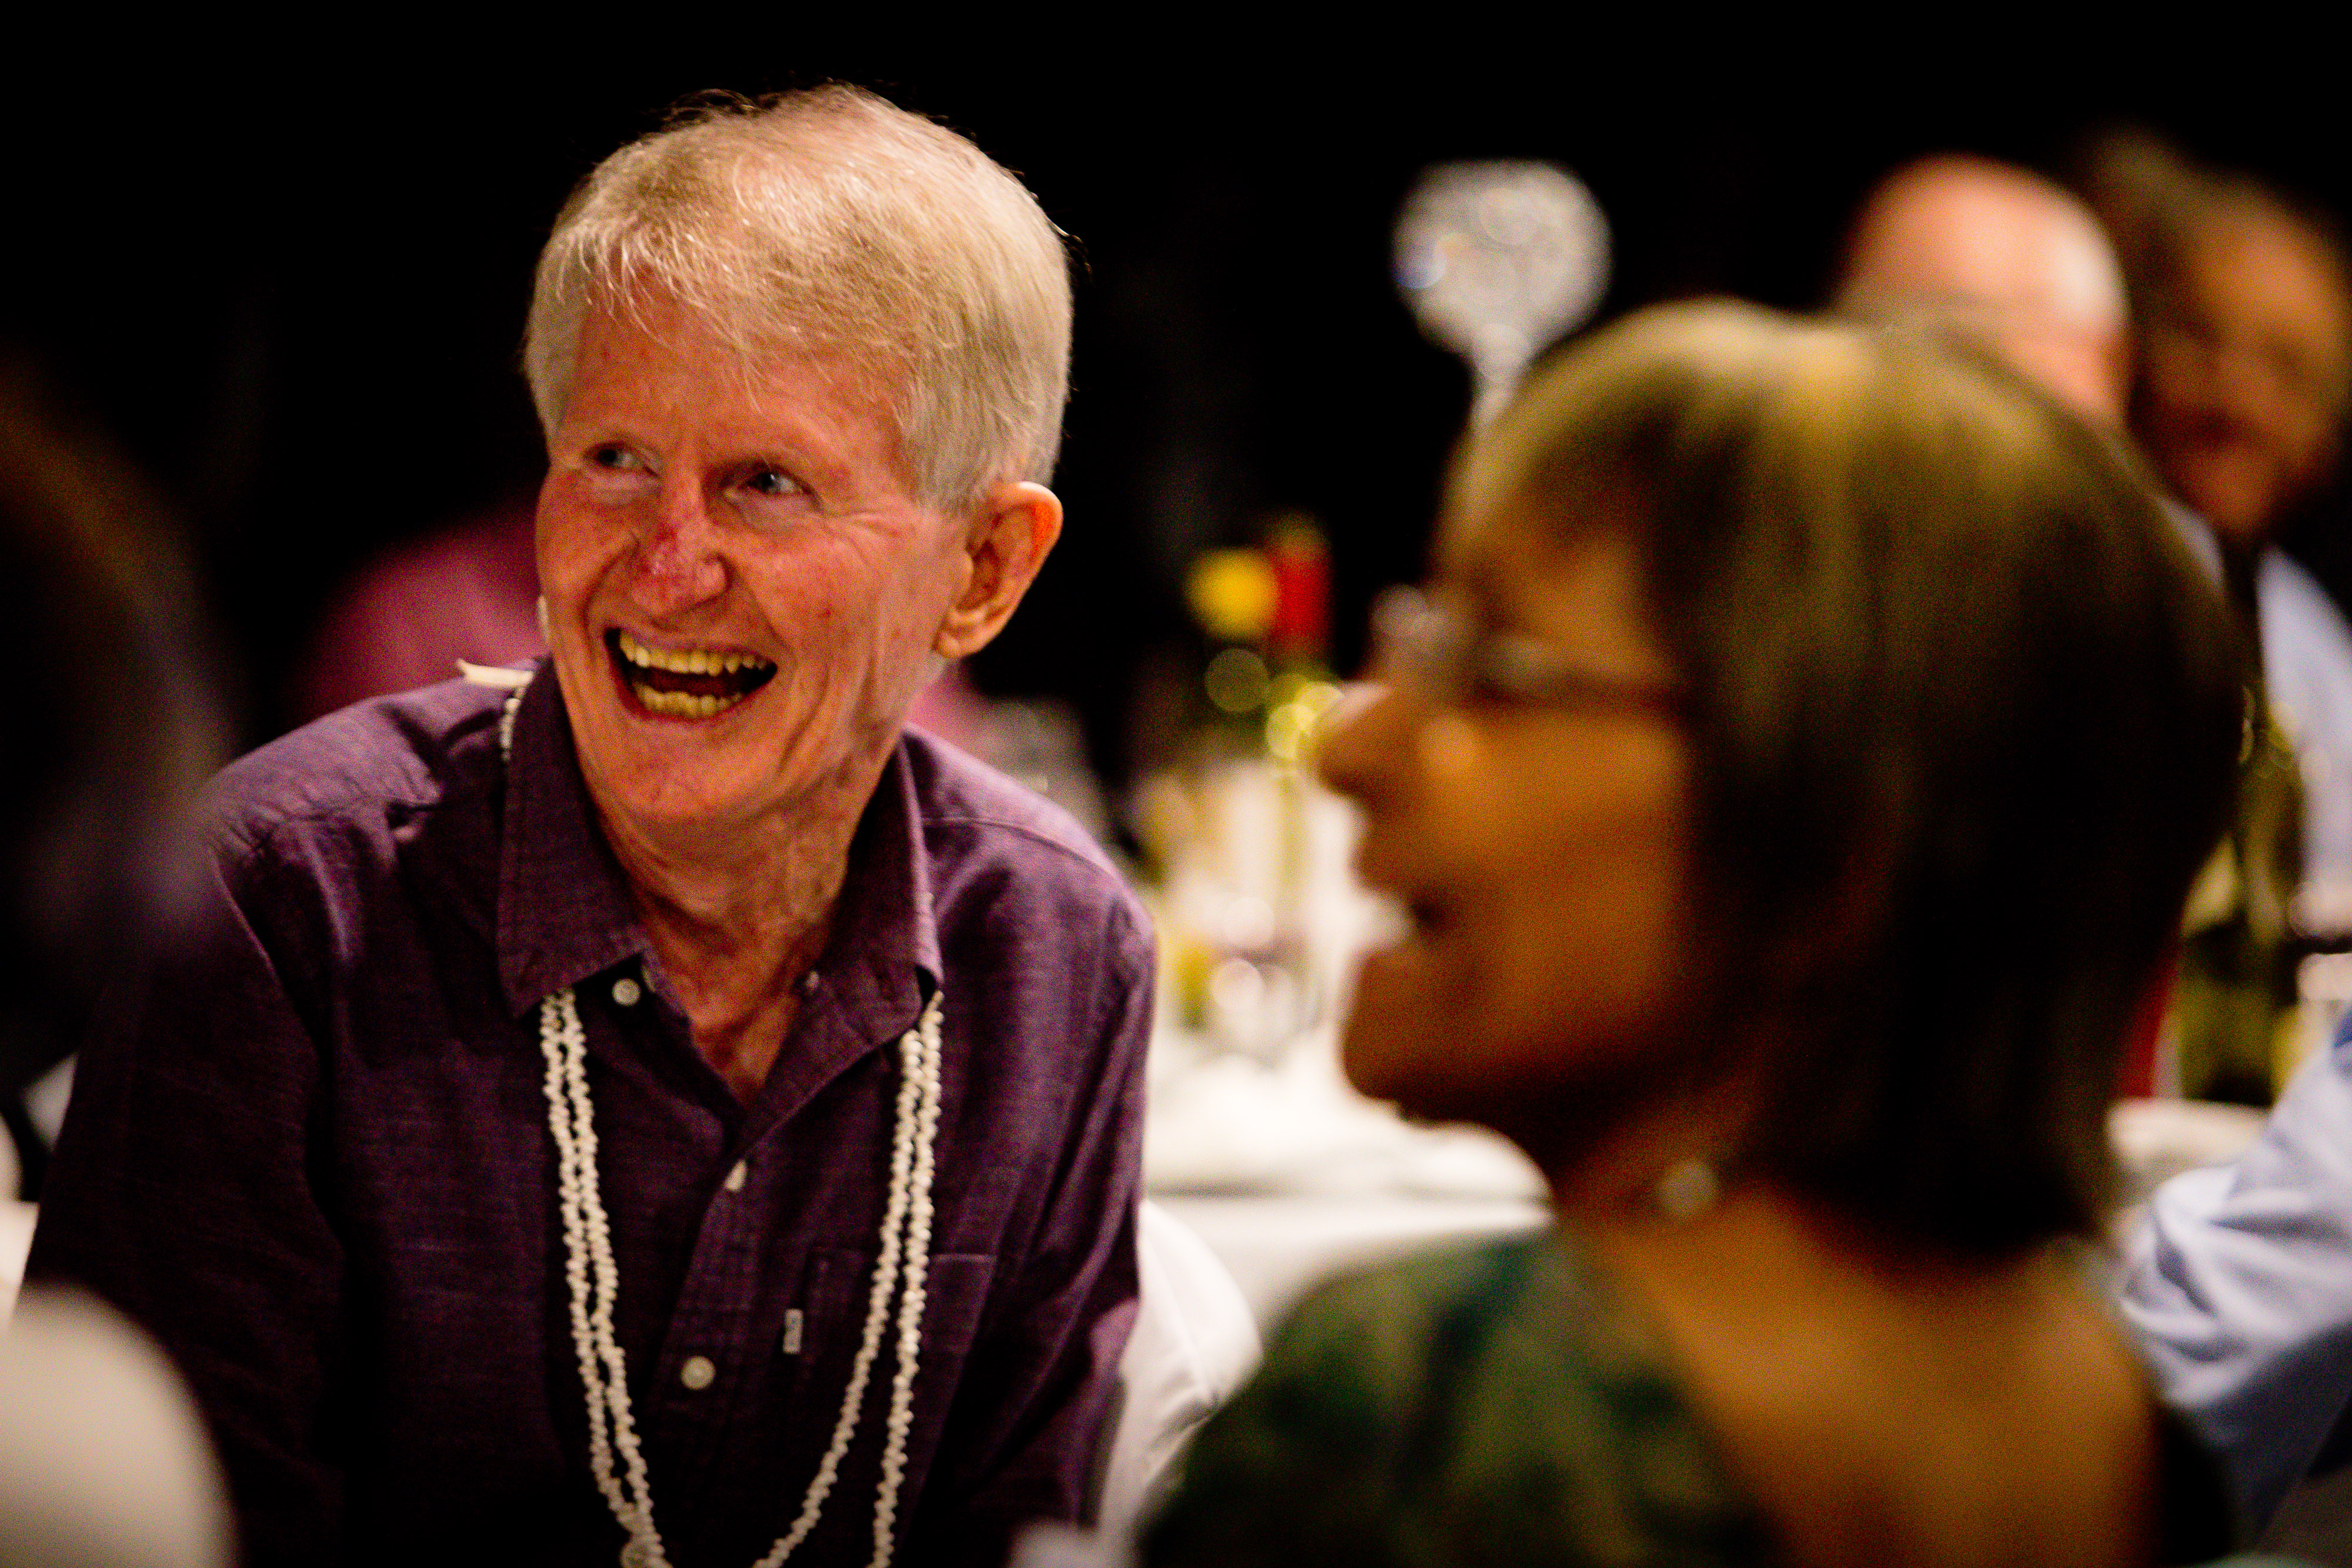 Sean Dorney at a tribute dinner at the Wests rugby union, Brisbane (Credit: Patrick Hamilton)